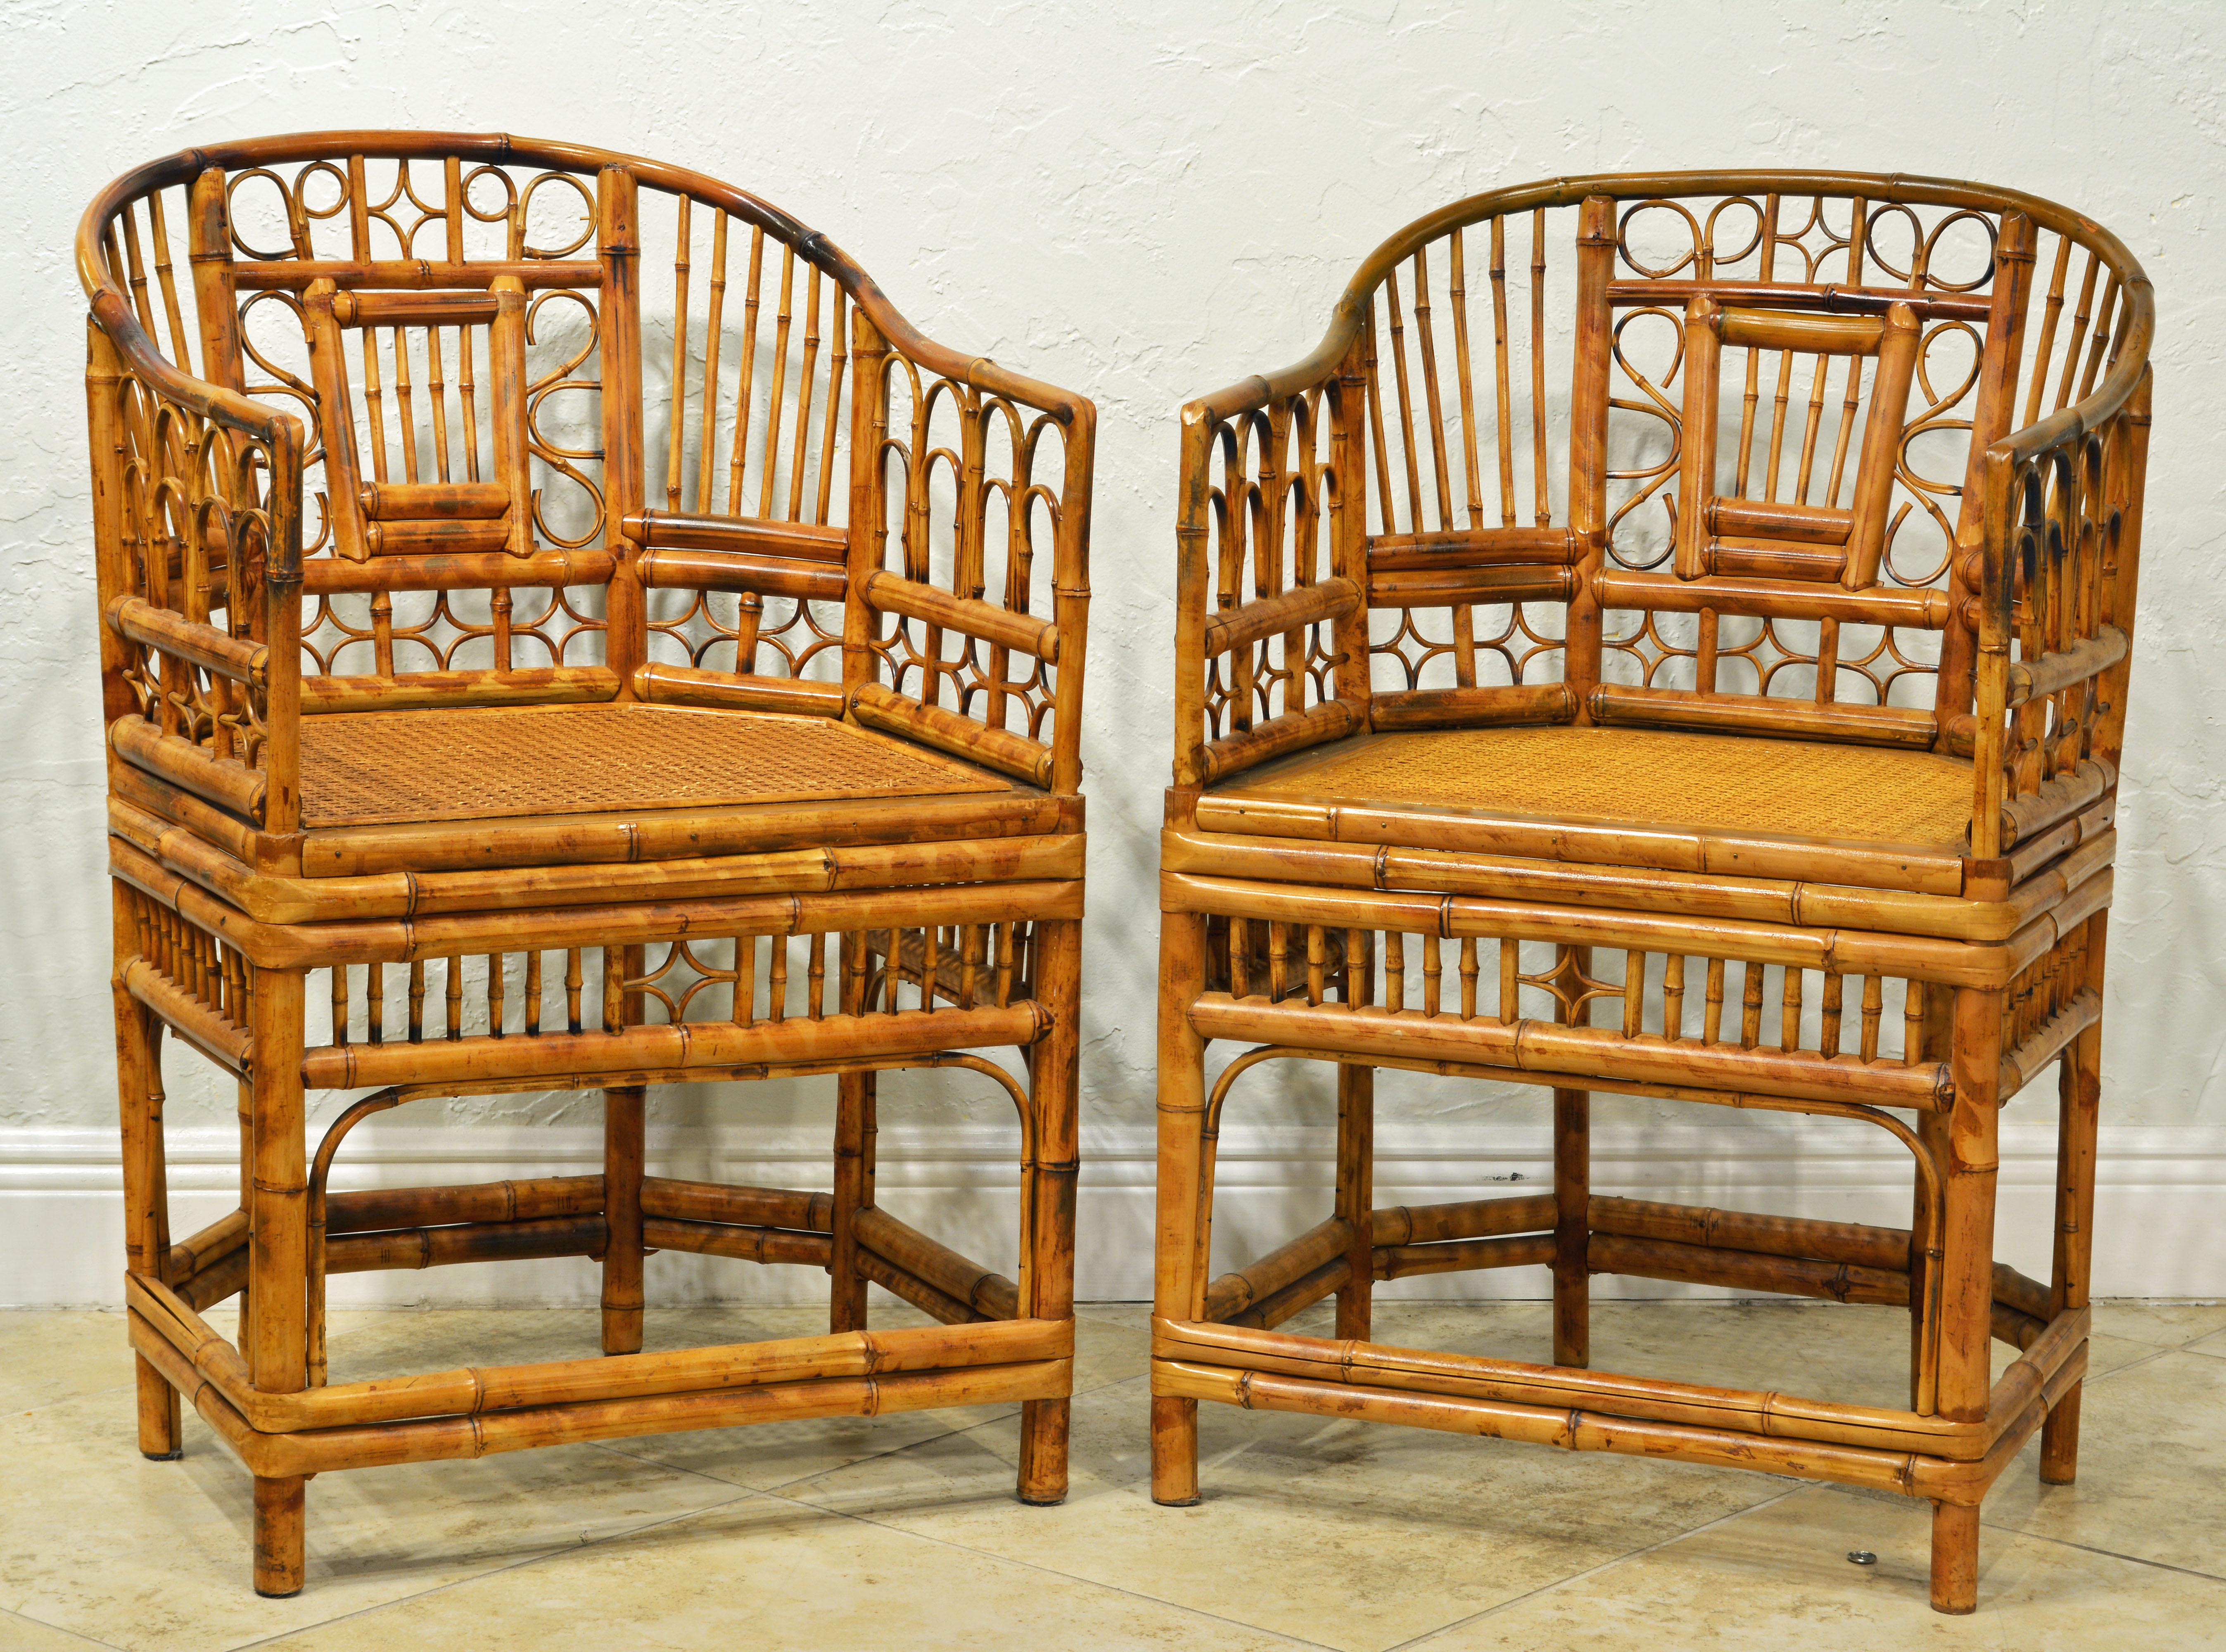 Rising on six legs this pair of intricately crafted iconic armchairs with cane seats feature bamboo frames and Chinese themed bamboo open work inspired by Chippendale design. They come with new cushions covered with Ralph Lauren Voyager fabric in